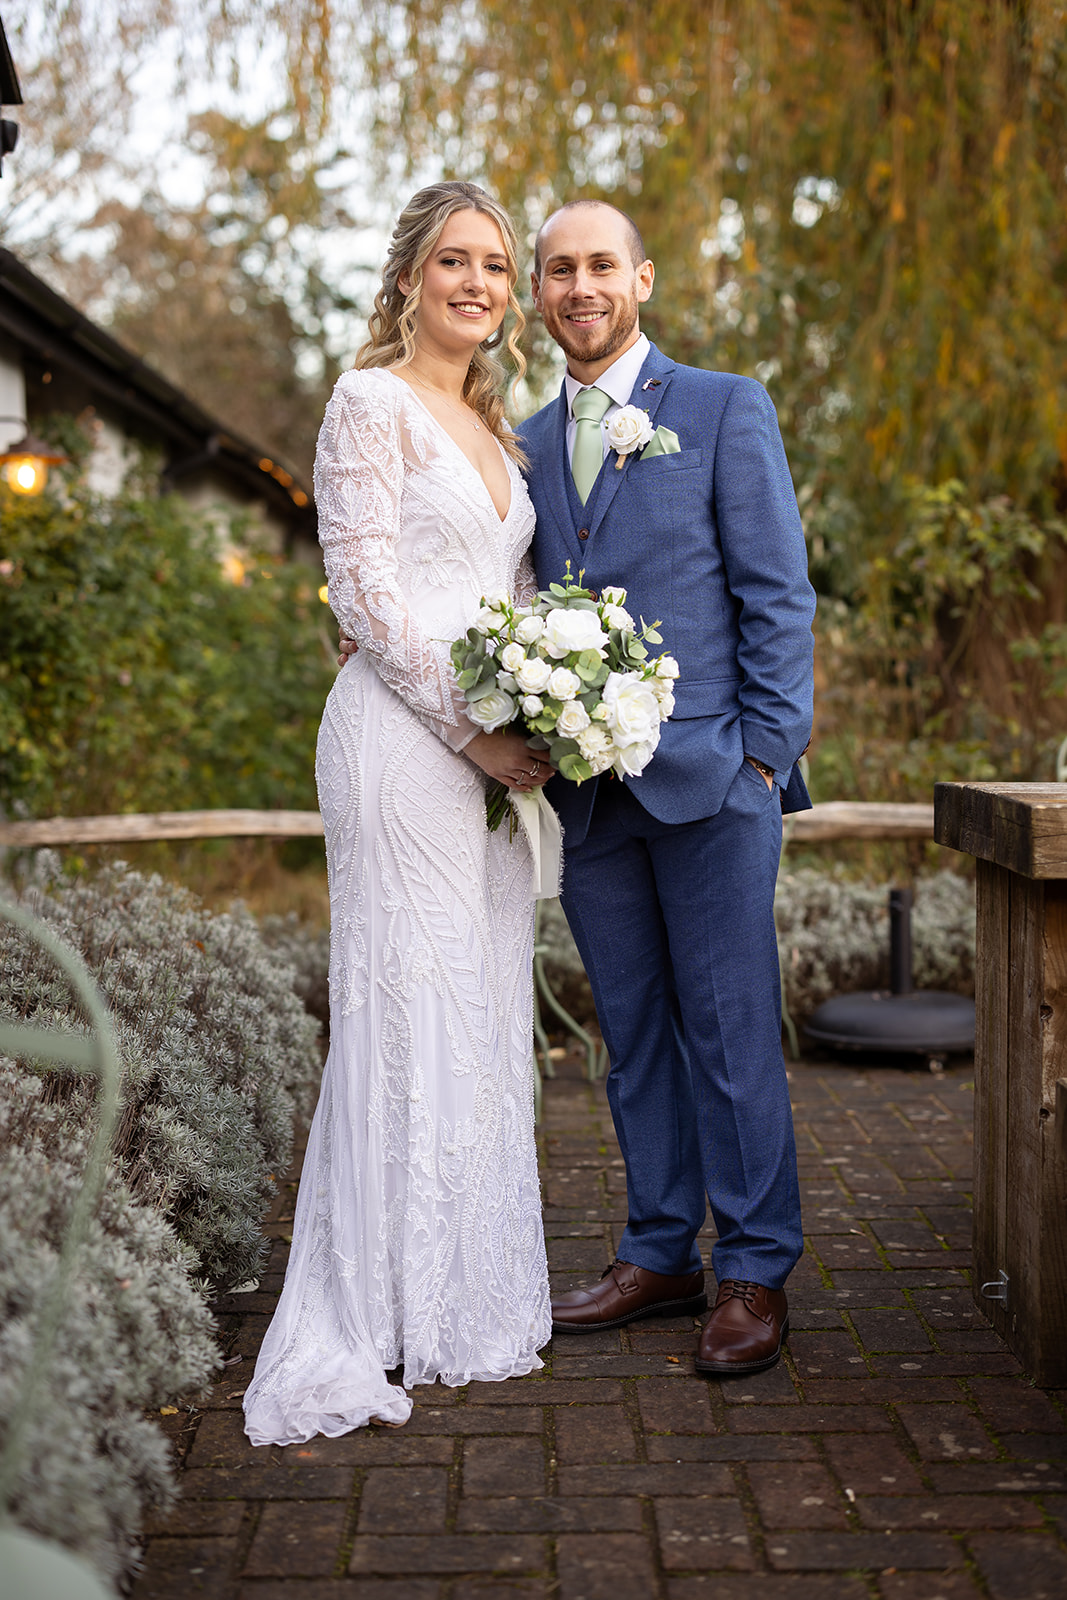 Nestled in the heart of the Test Valley, a couple's love story unfolded at the Kimbridge Barn in Romsey, Hampsh